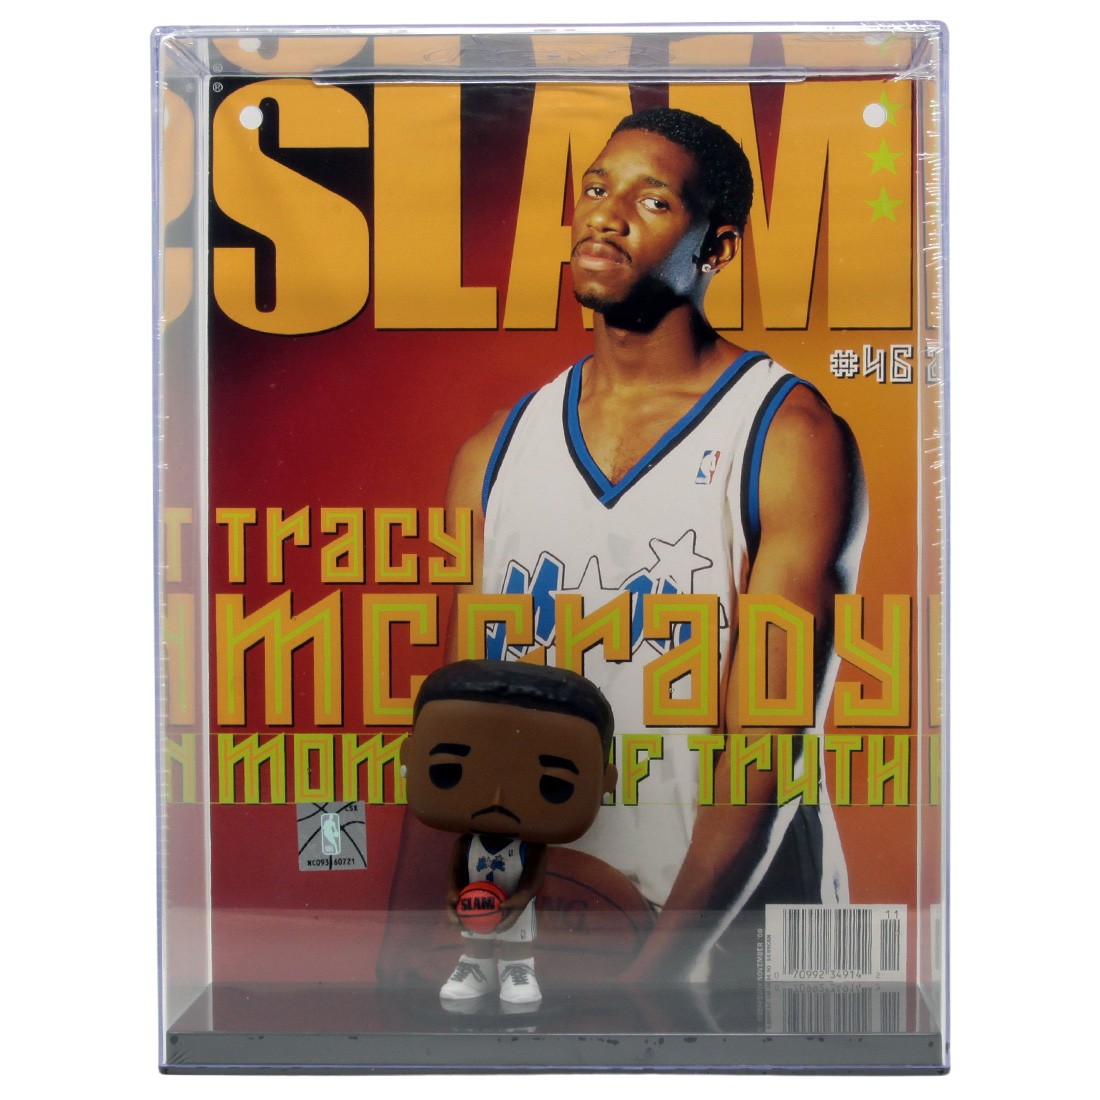 Tracy McGrady email address & phone number